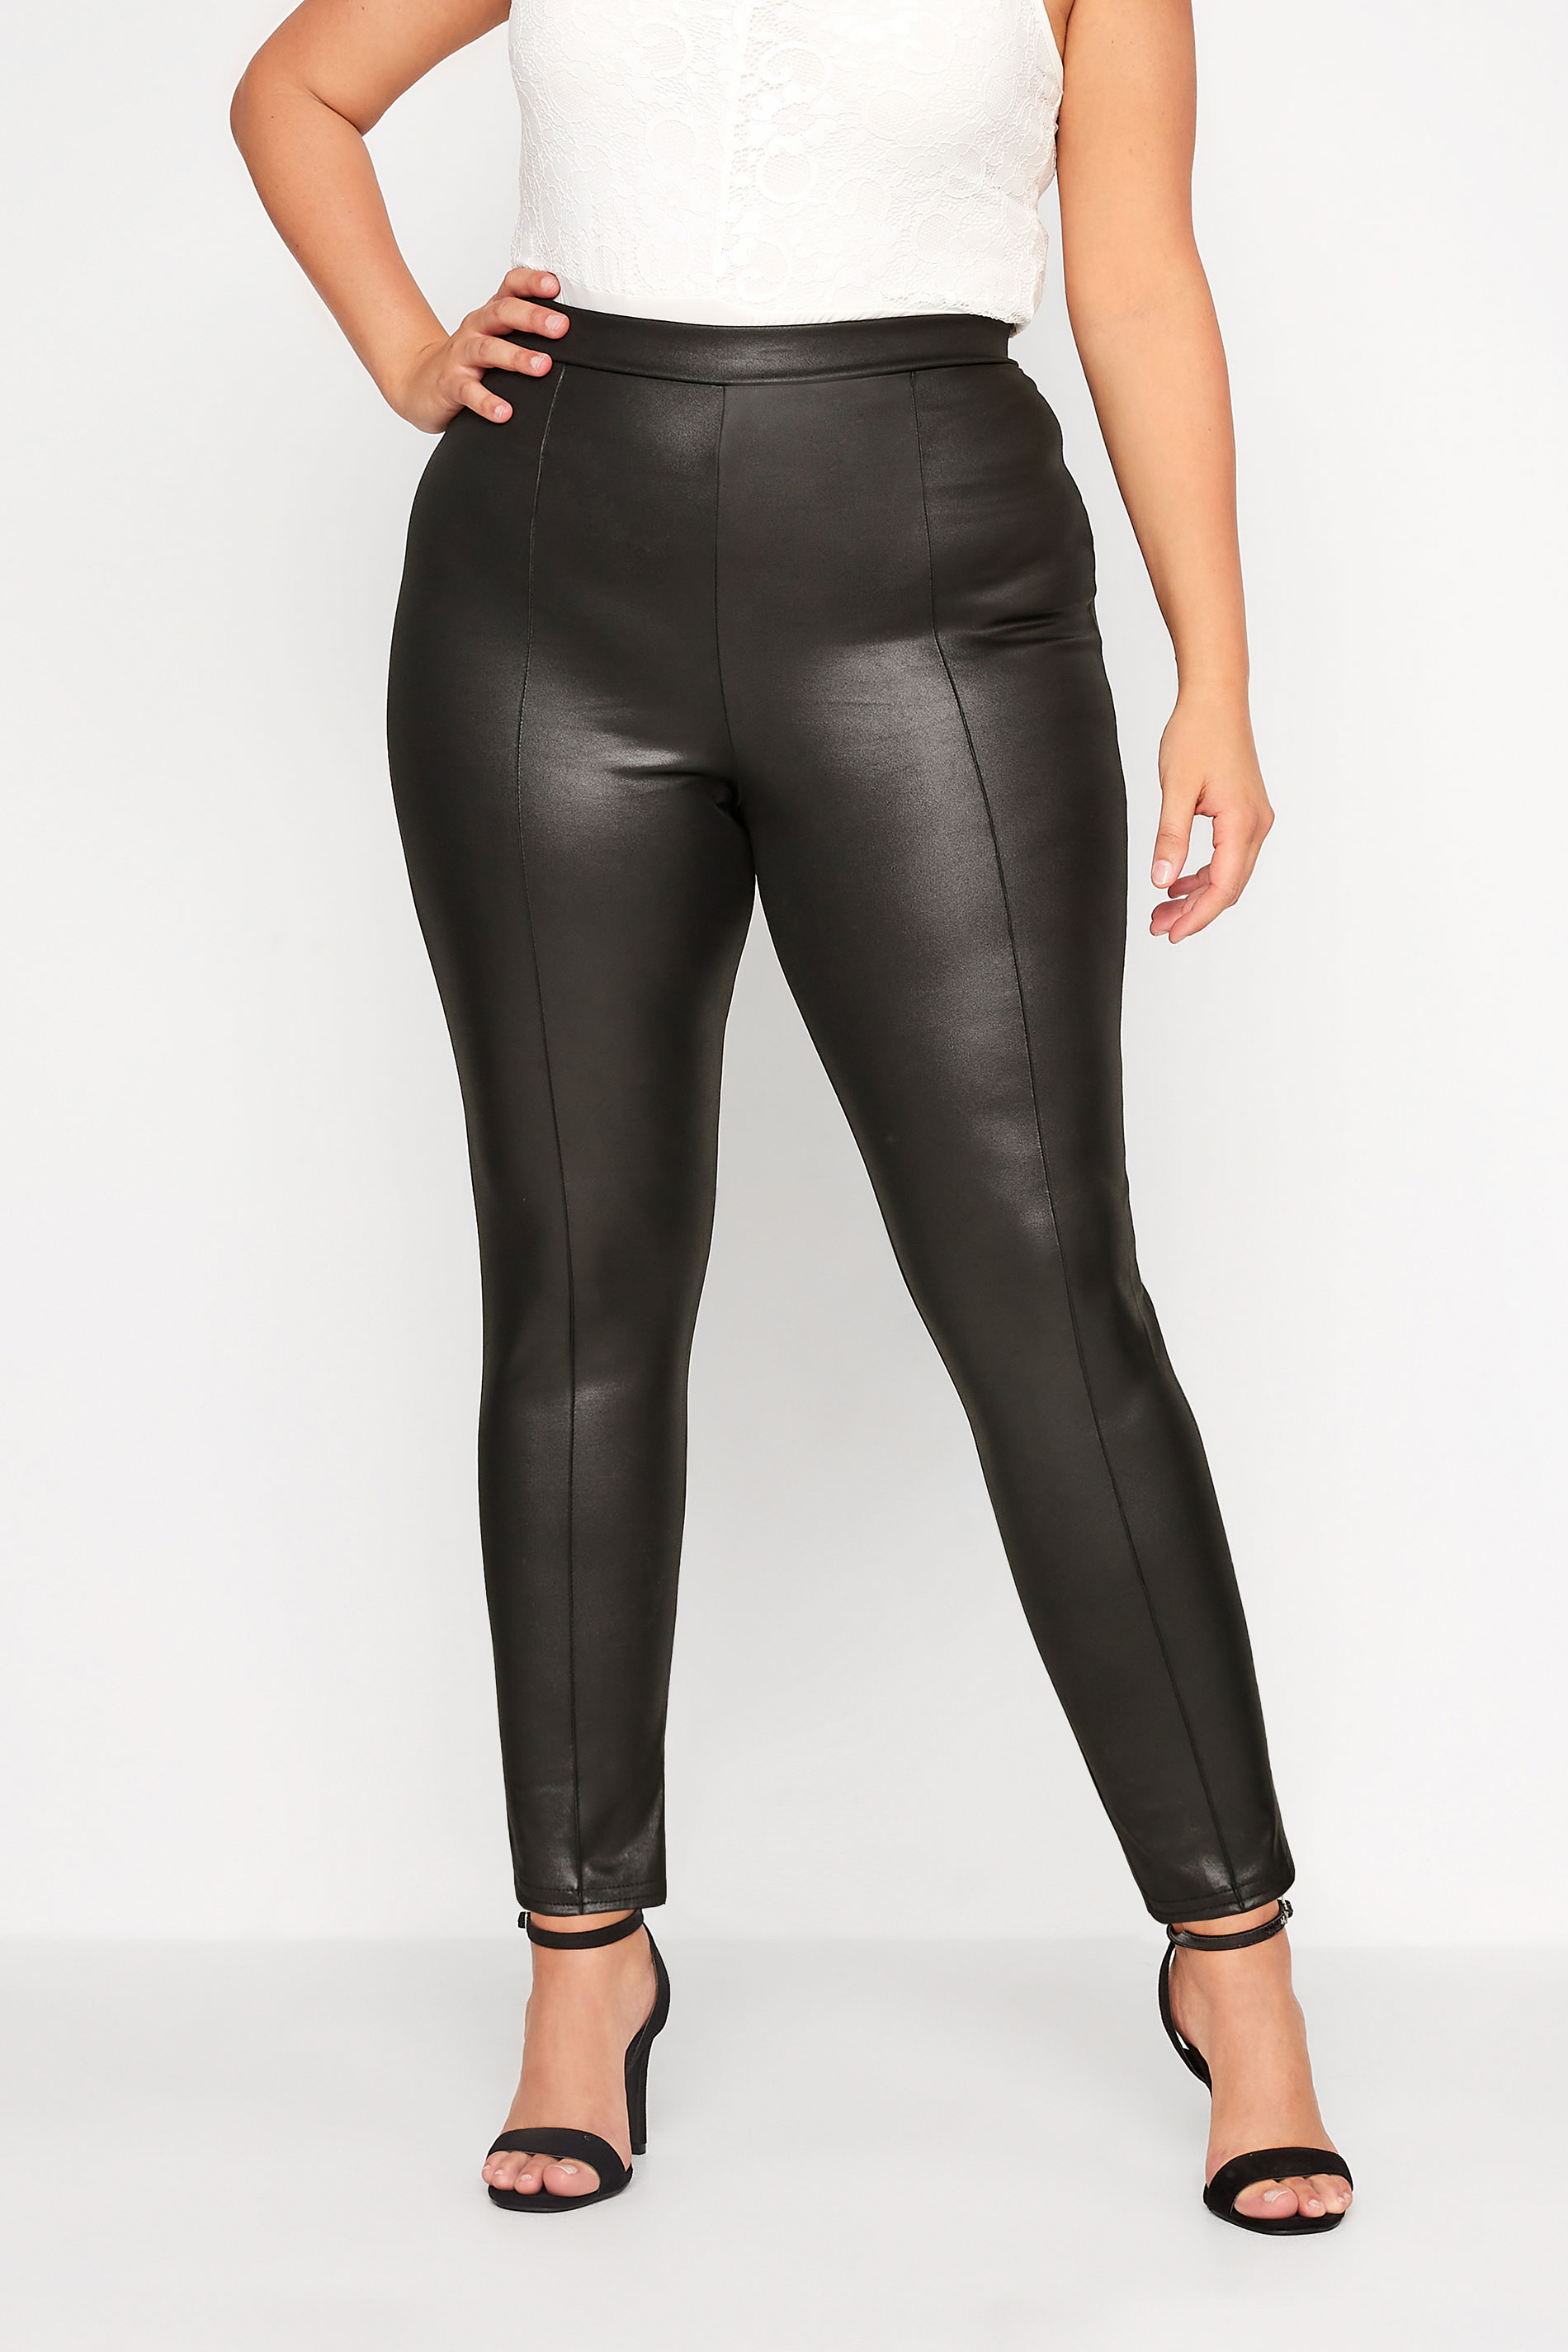 YOURS LONDON Curve Black Front Seam Leather Look Leggings_B.jpg